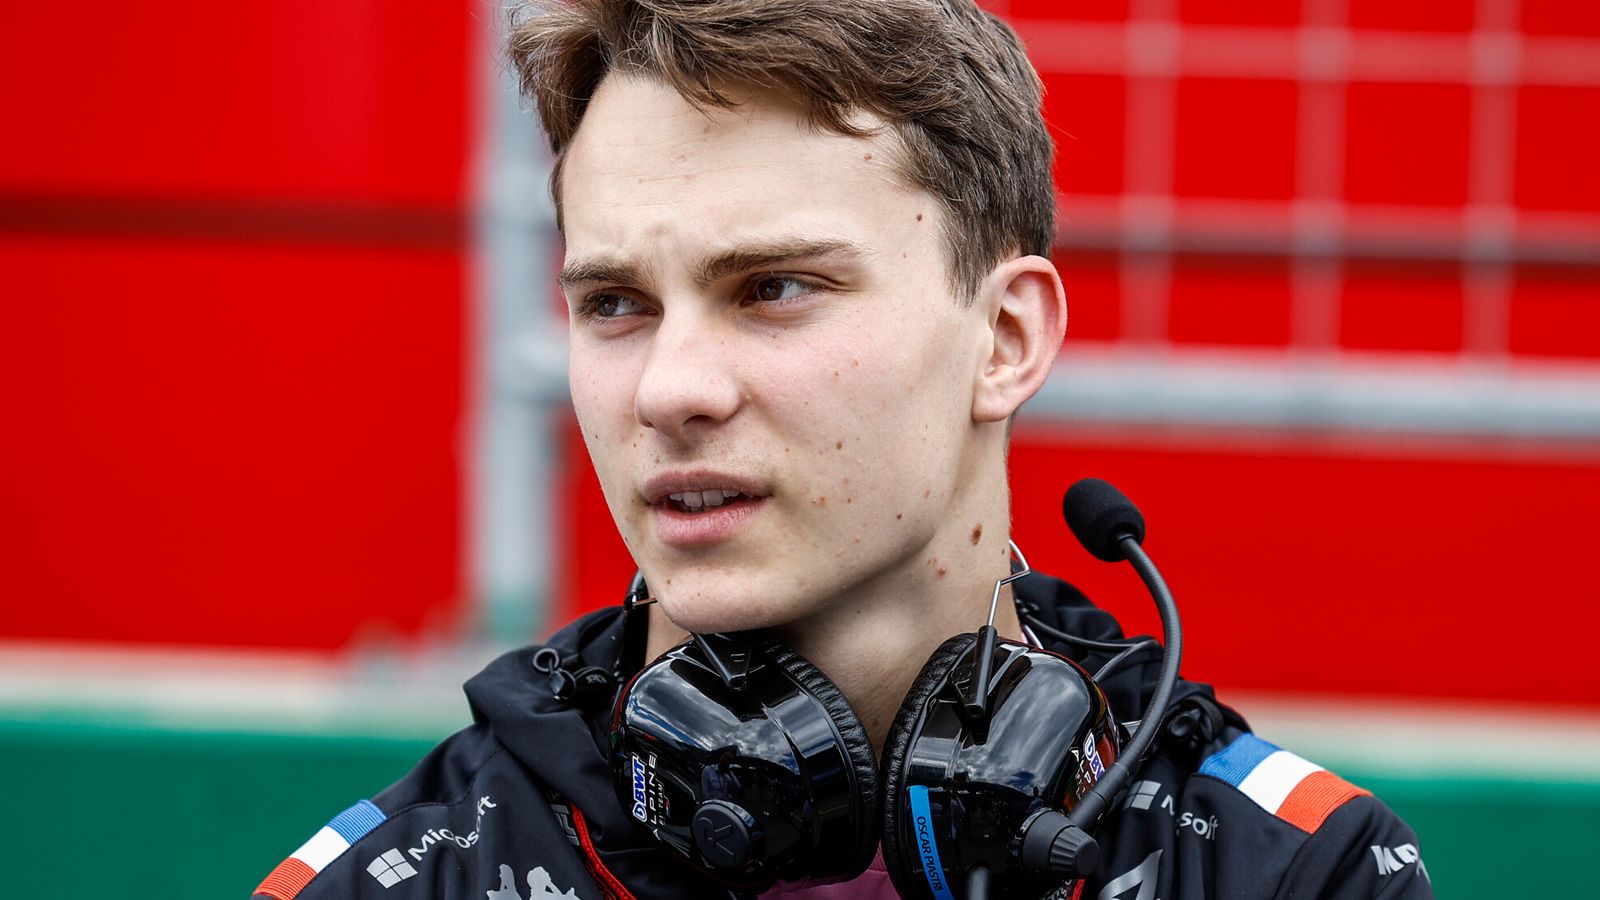 Oscar Piastri denies Alpine announcement and says he will be driving elsewhere in Formula 1 2023